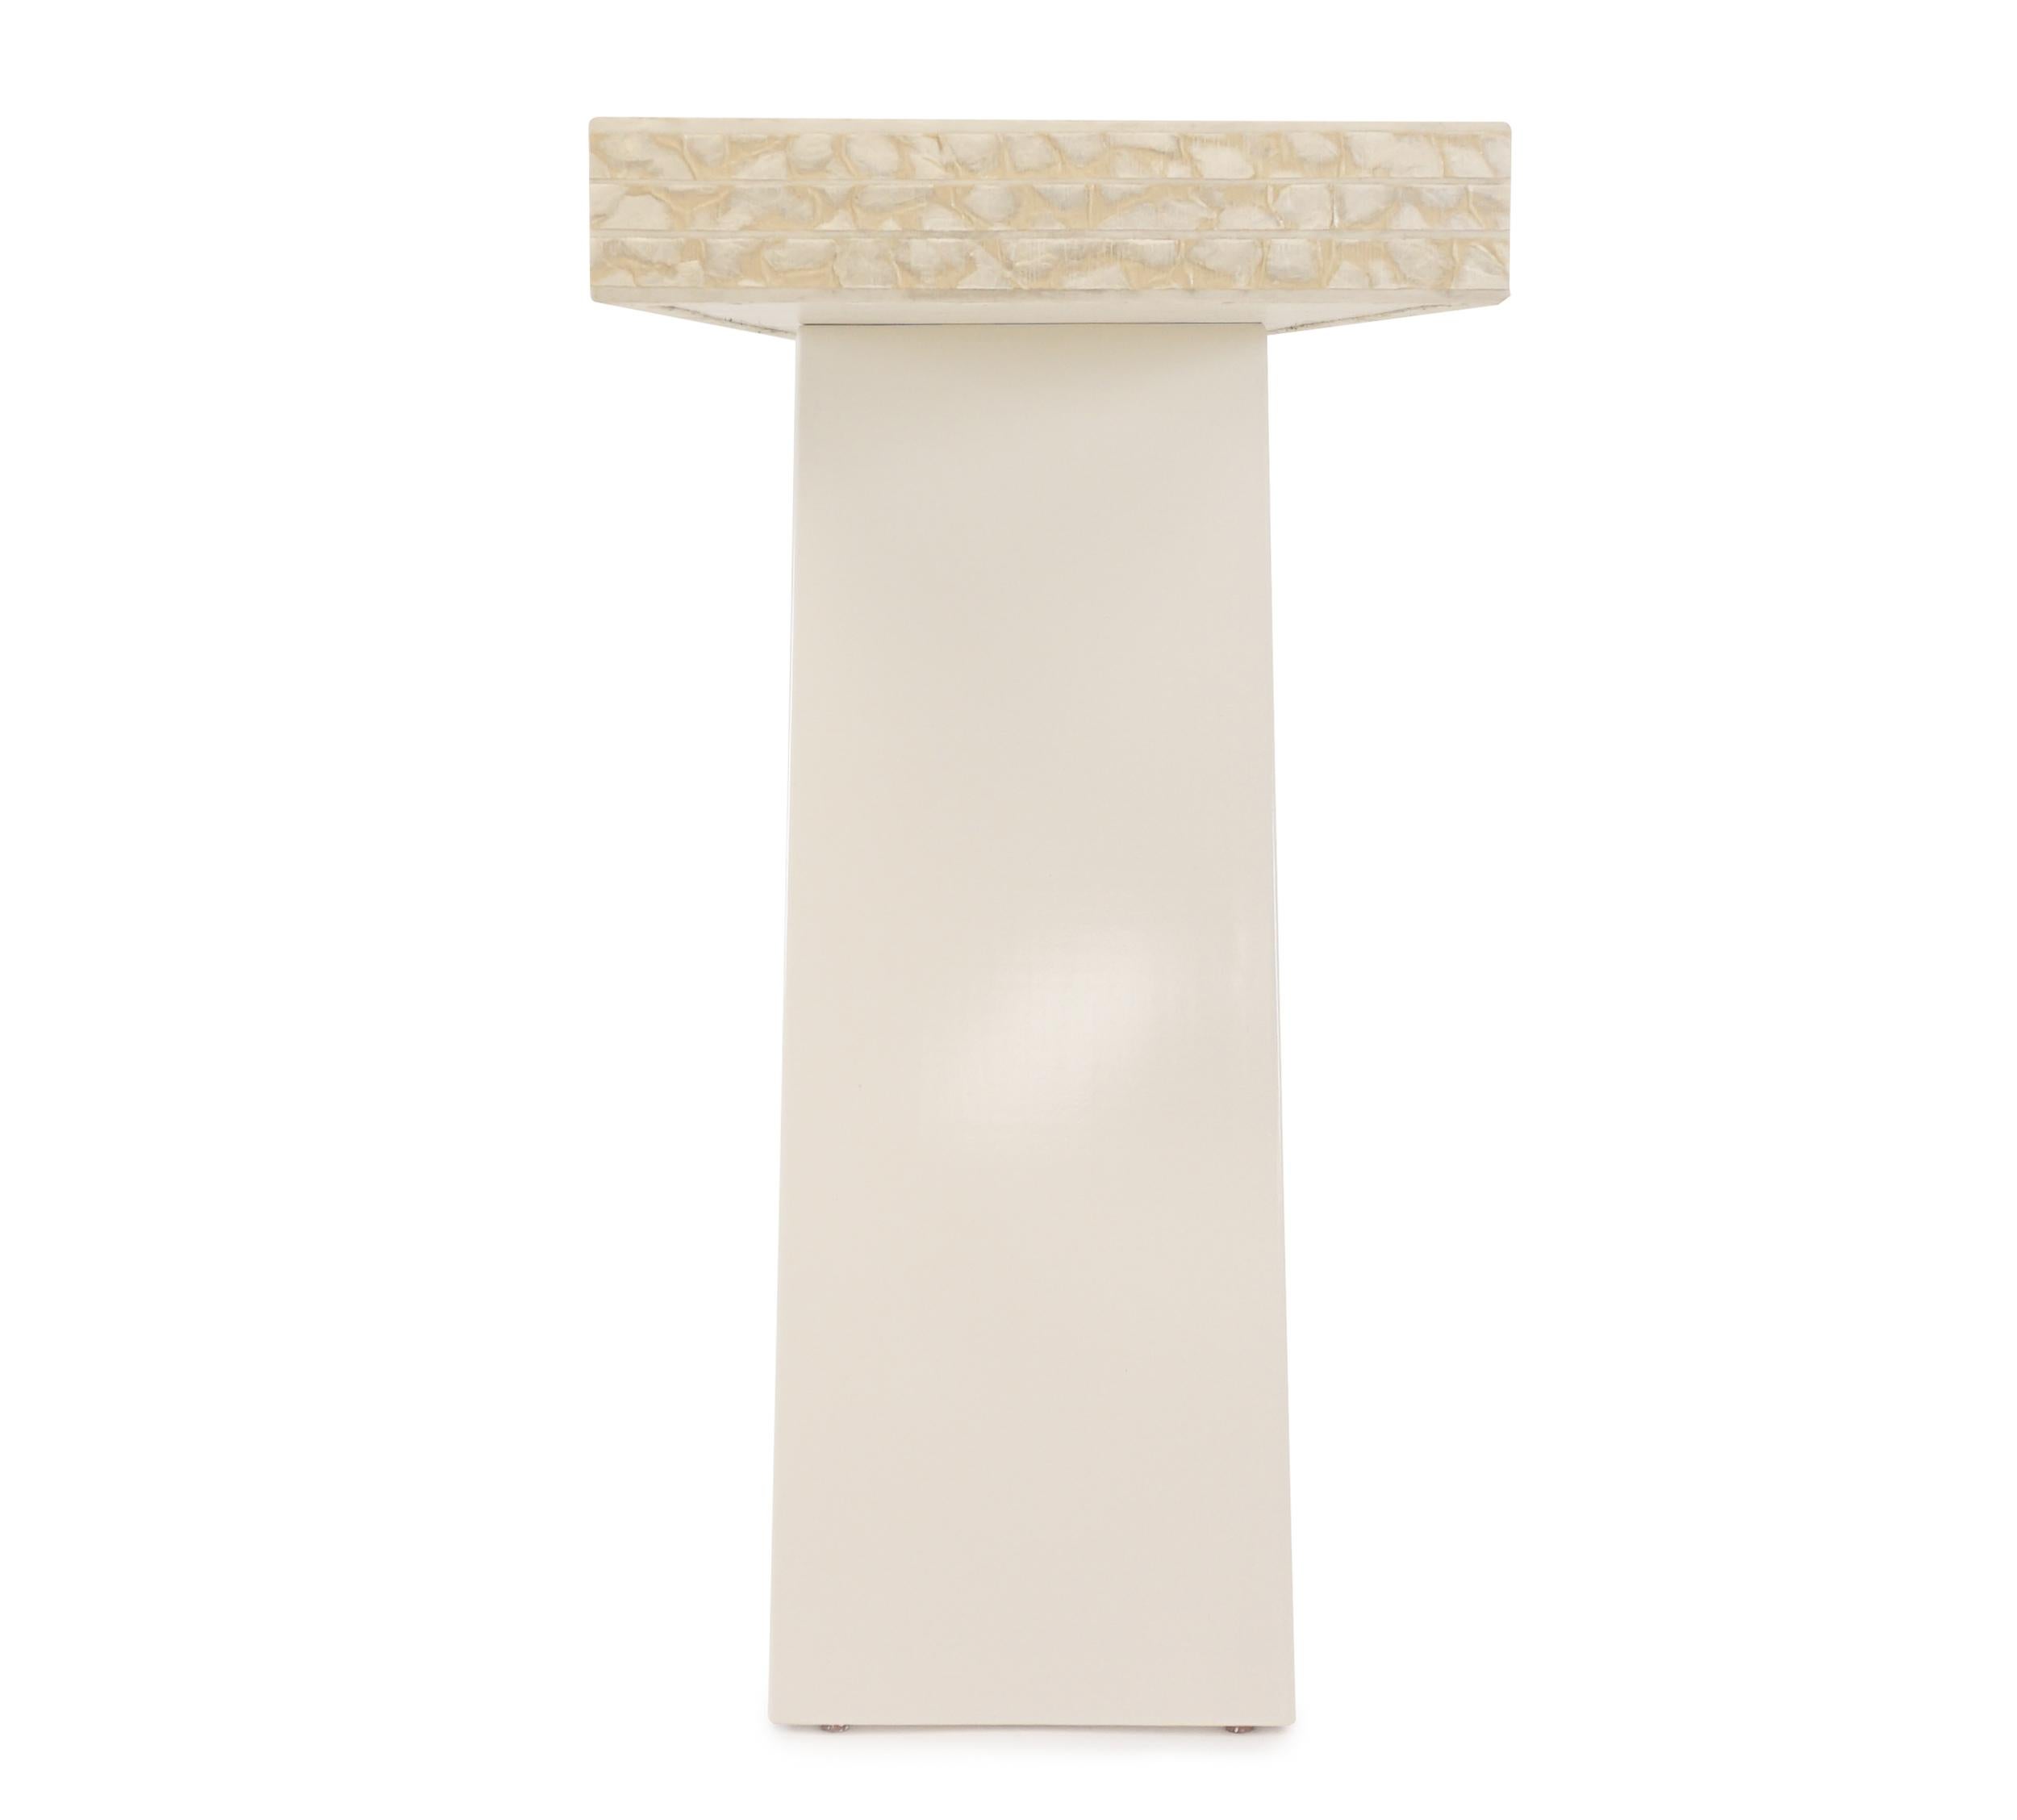 Modern console table. Elegant sea shell top with white lacquer x-style base. Can be customized with different coverings, woods, and stain & paint finishes. The shell pieces are set in epoxy on a paper with grass stripes running through, grainy to